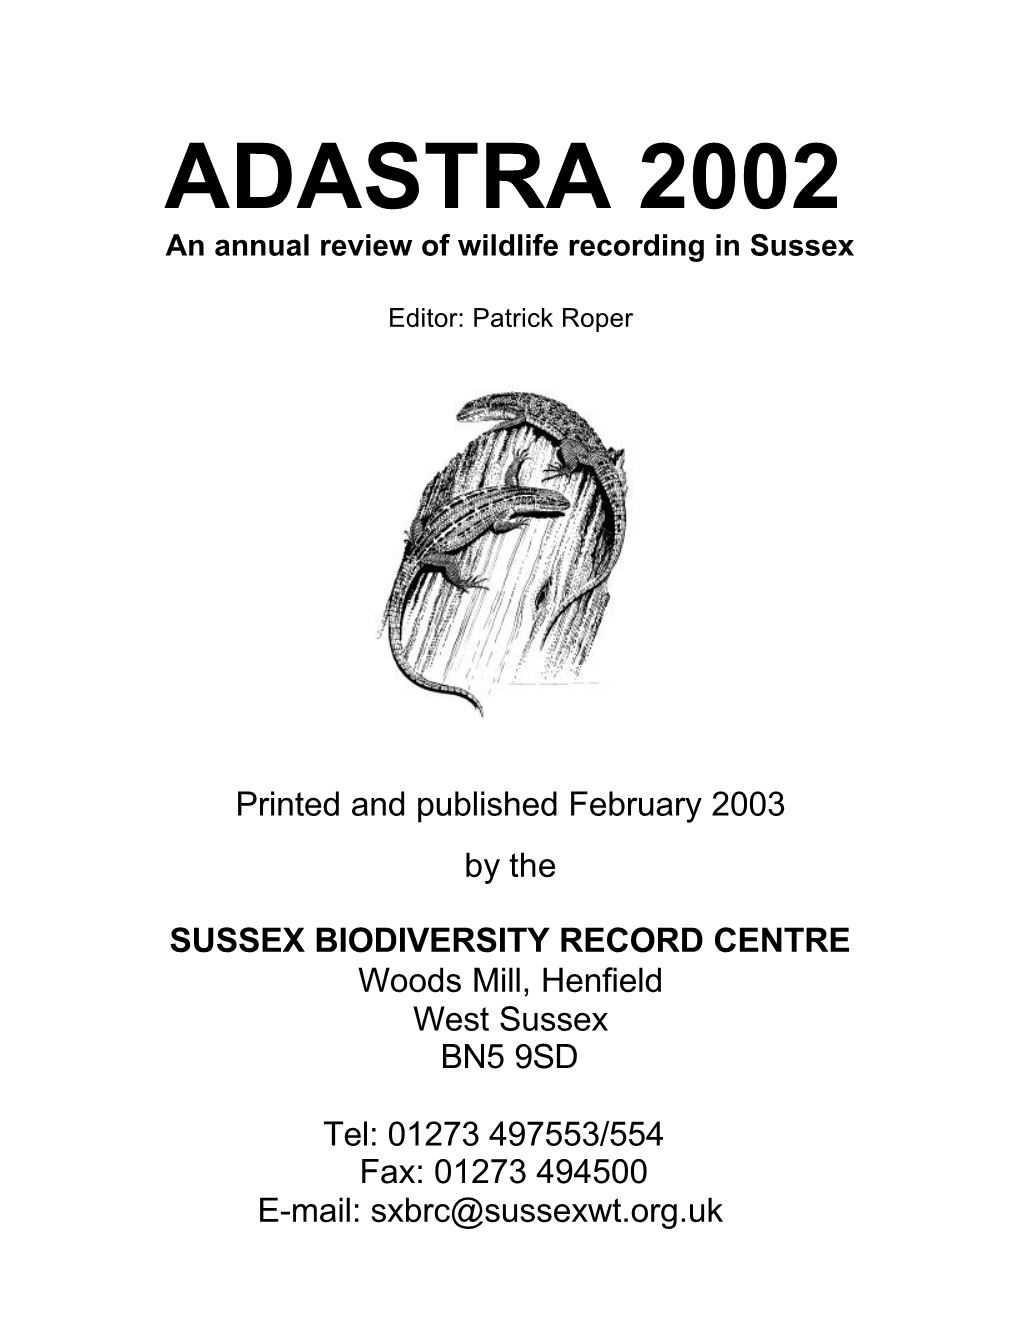 ADASTRA 2002 an Annual Review of Wildlife Recording in Sussex